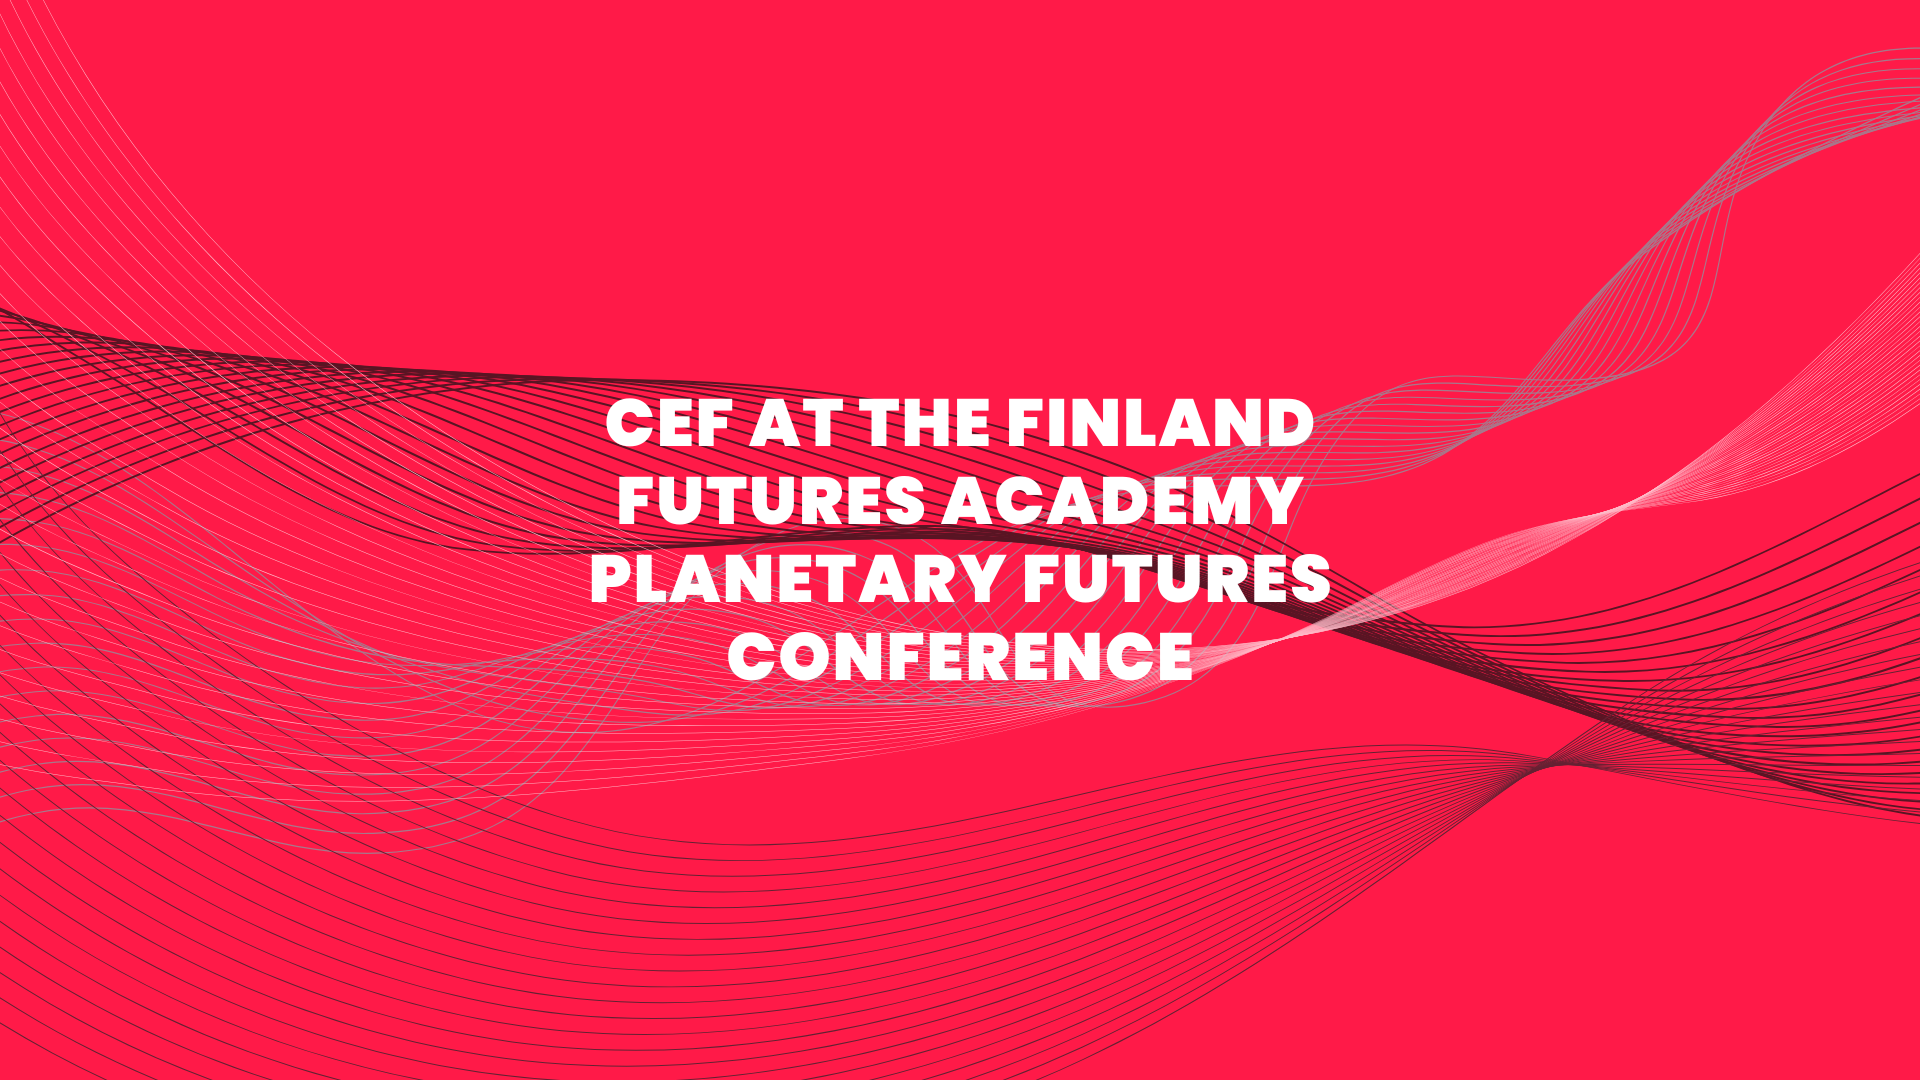 CEF at the Finland Futures Academy Planetary Futures Conference